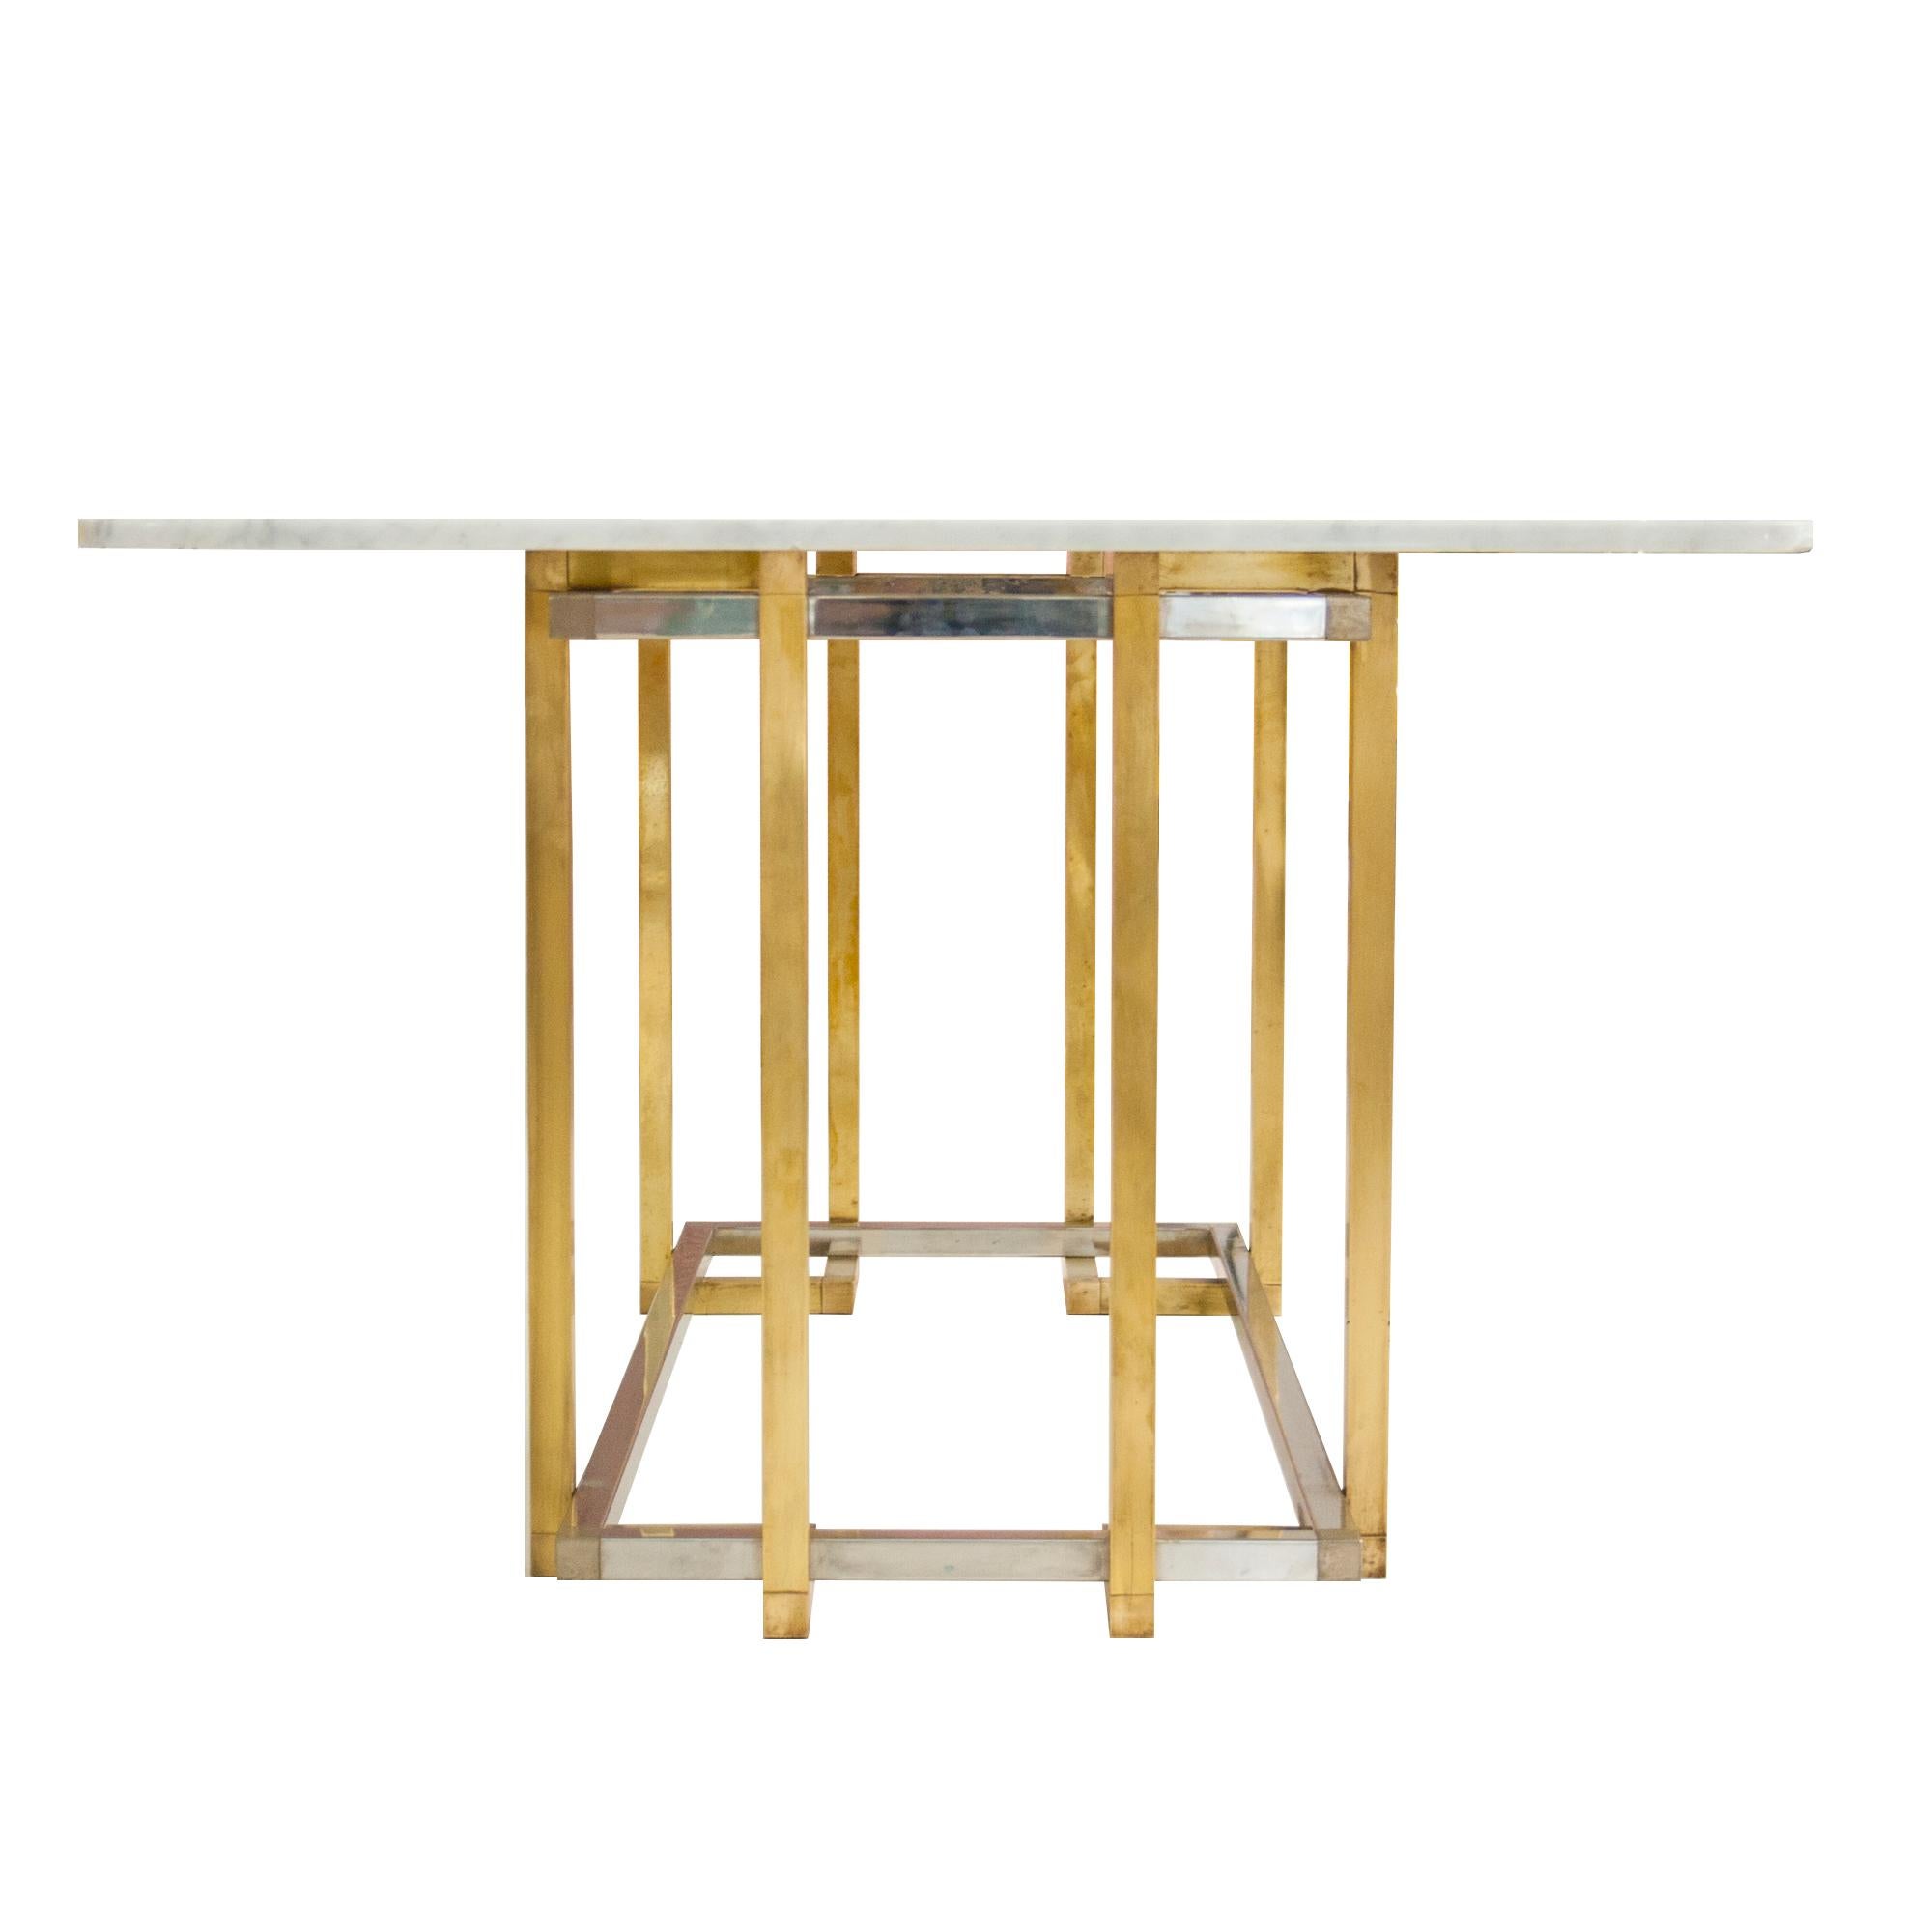 Dining table designed by Willy Rizzo. It is made up of a Carrara marble top on a foot made of a square tubular structure in chromed and brass-plated steel.